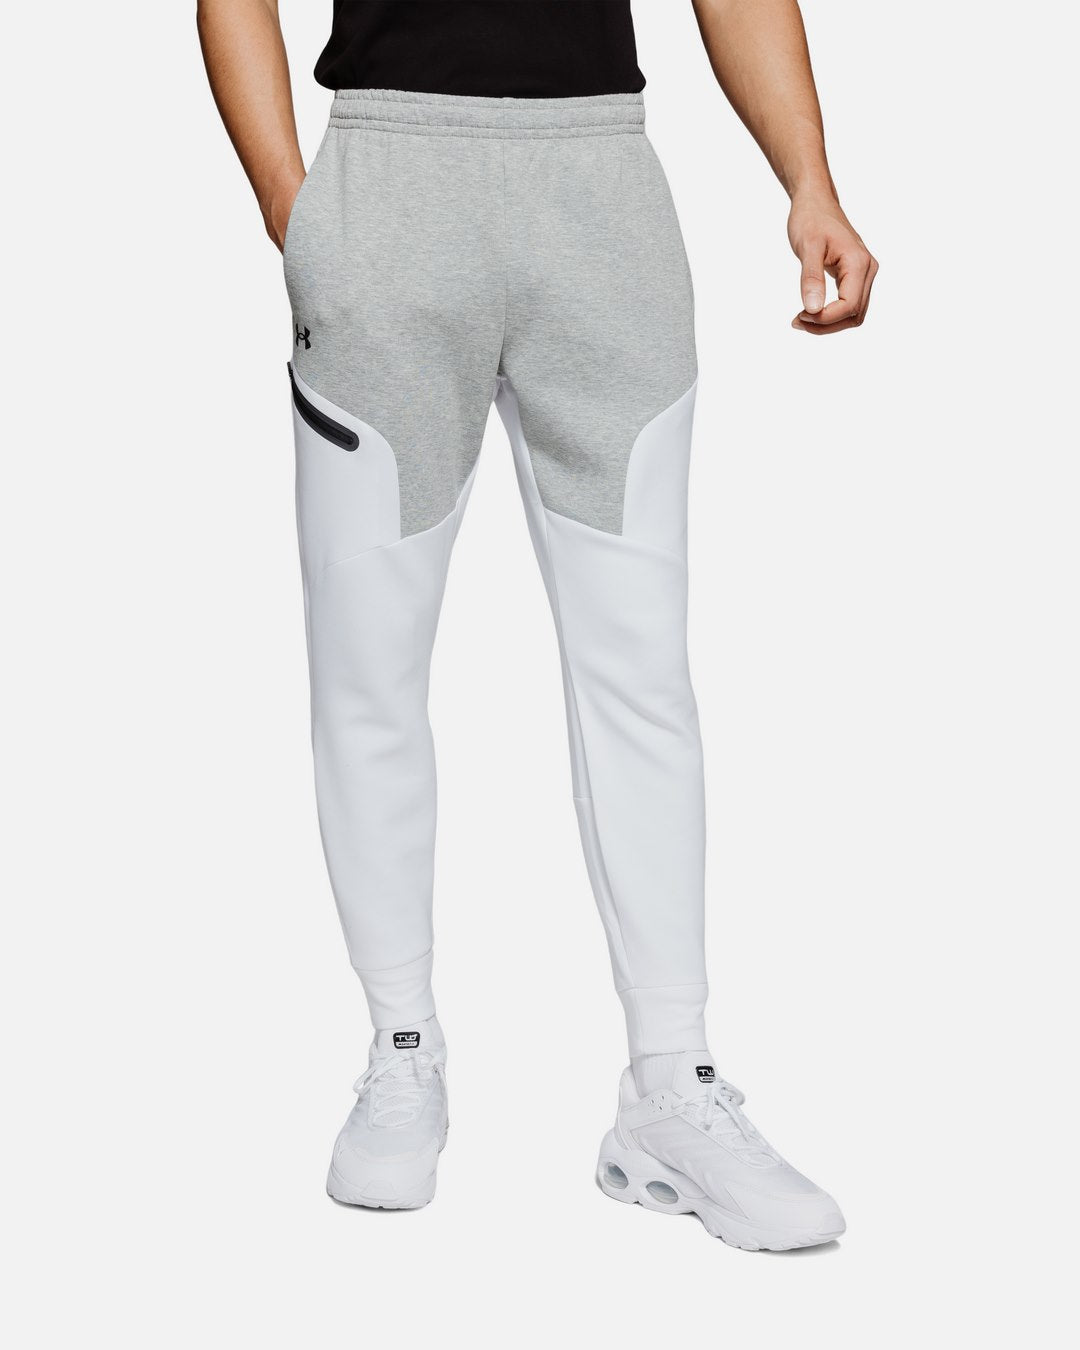 Pantaloni in pile Under Armour Unstoppable - Grigio/Bianco